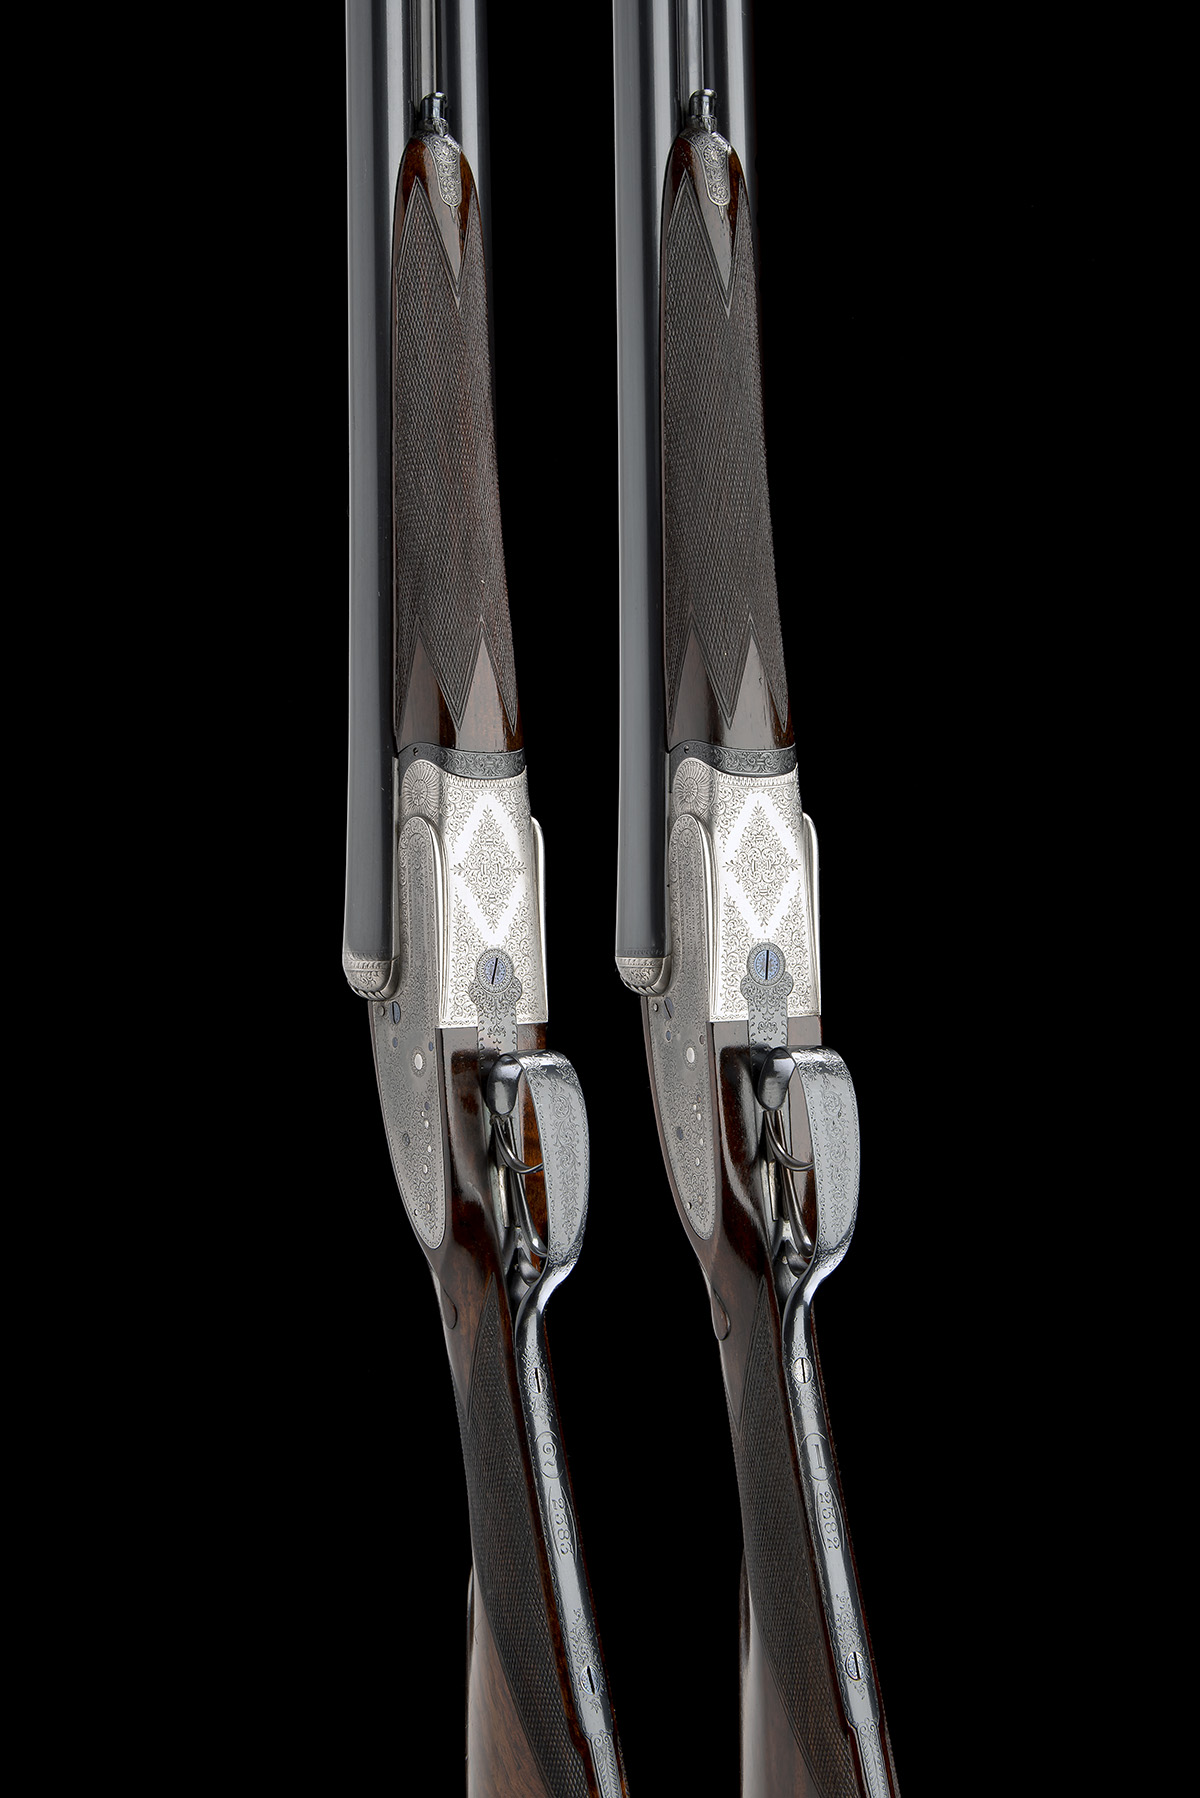 WILLIAM EVANS (FROM PURDEY'S) A PAIR OF 12-BORE SIDELOCK EJECTORS, serial no. 2382 / 3, for 1891, - Image 3 of 11